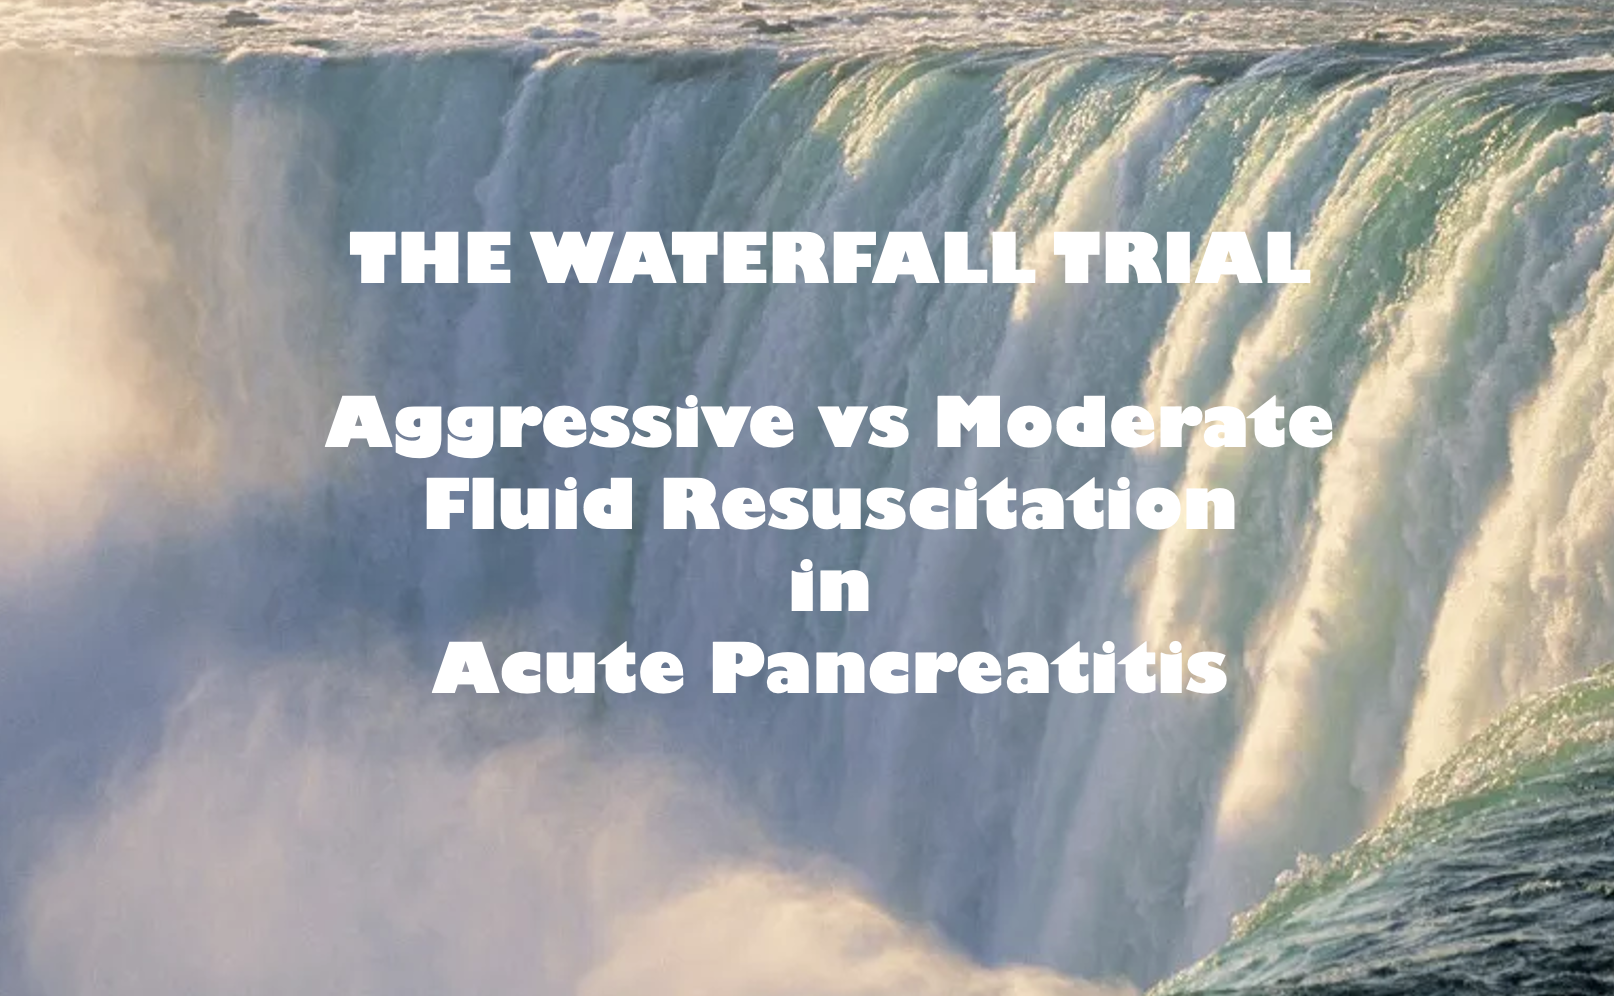 The Waterfall Trial: Aggressive vs Moderate Fluid Resuscitation in Acute Pancreatitis